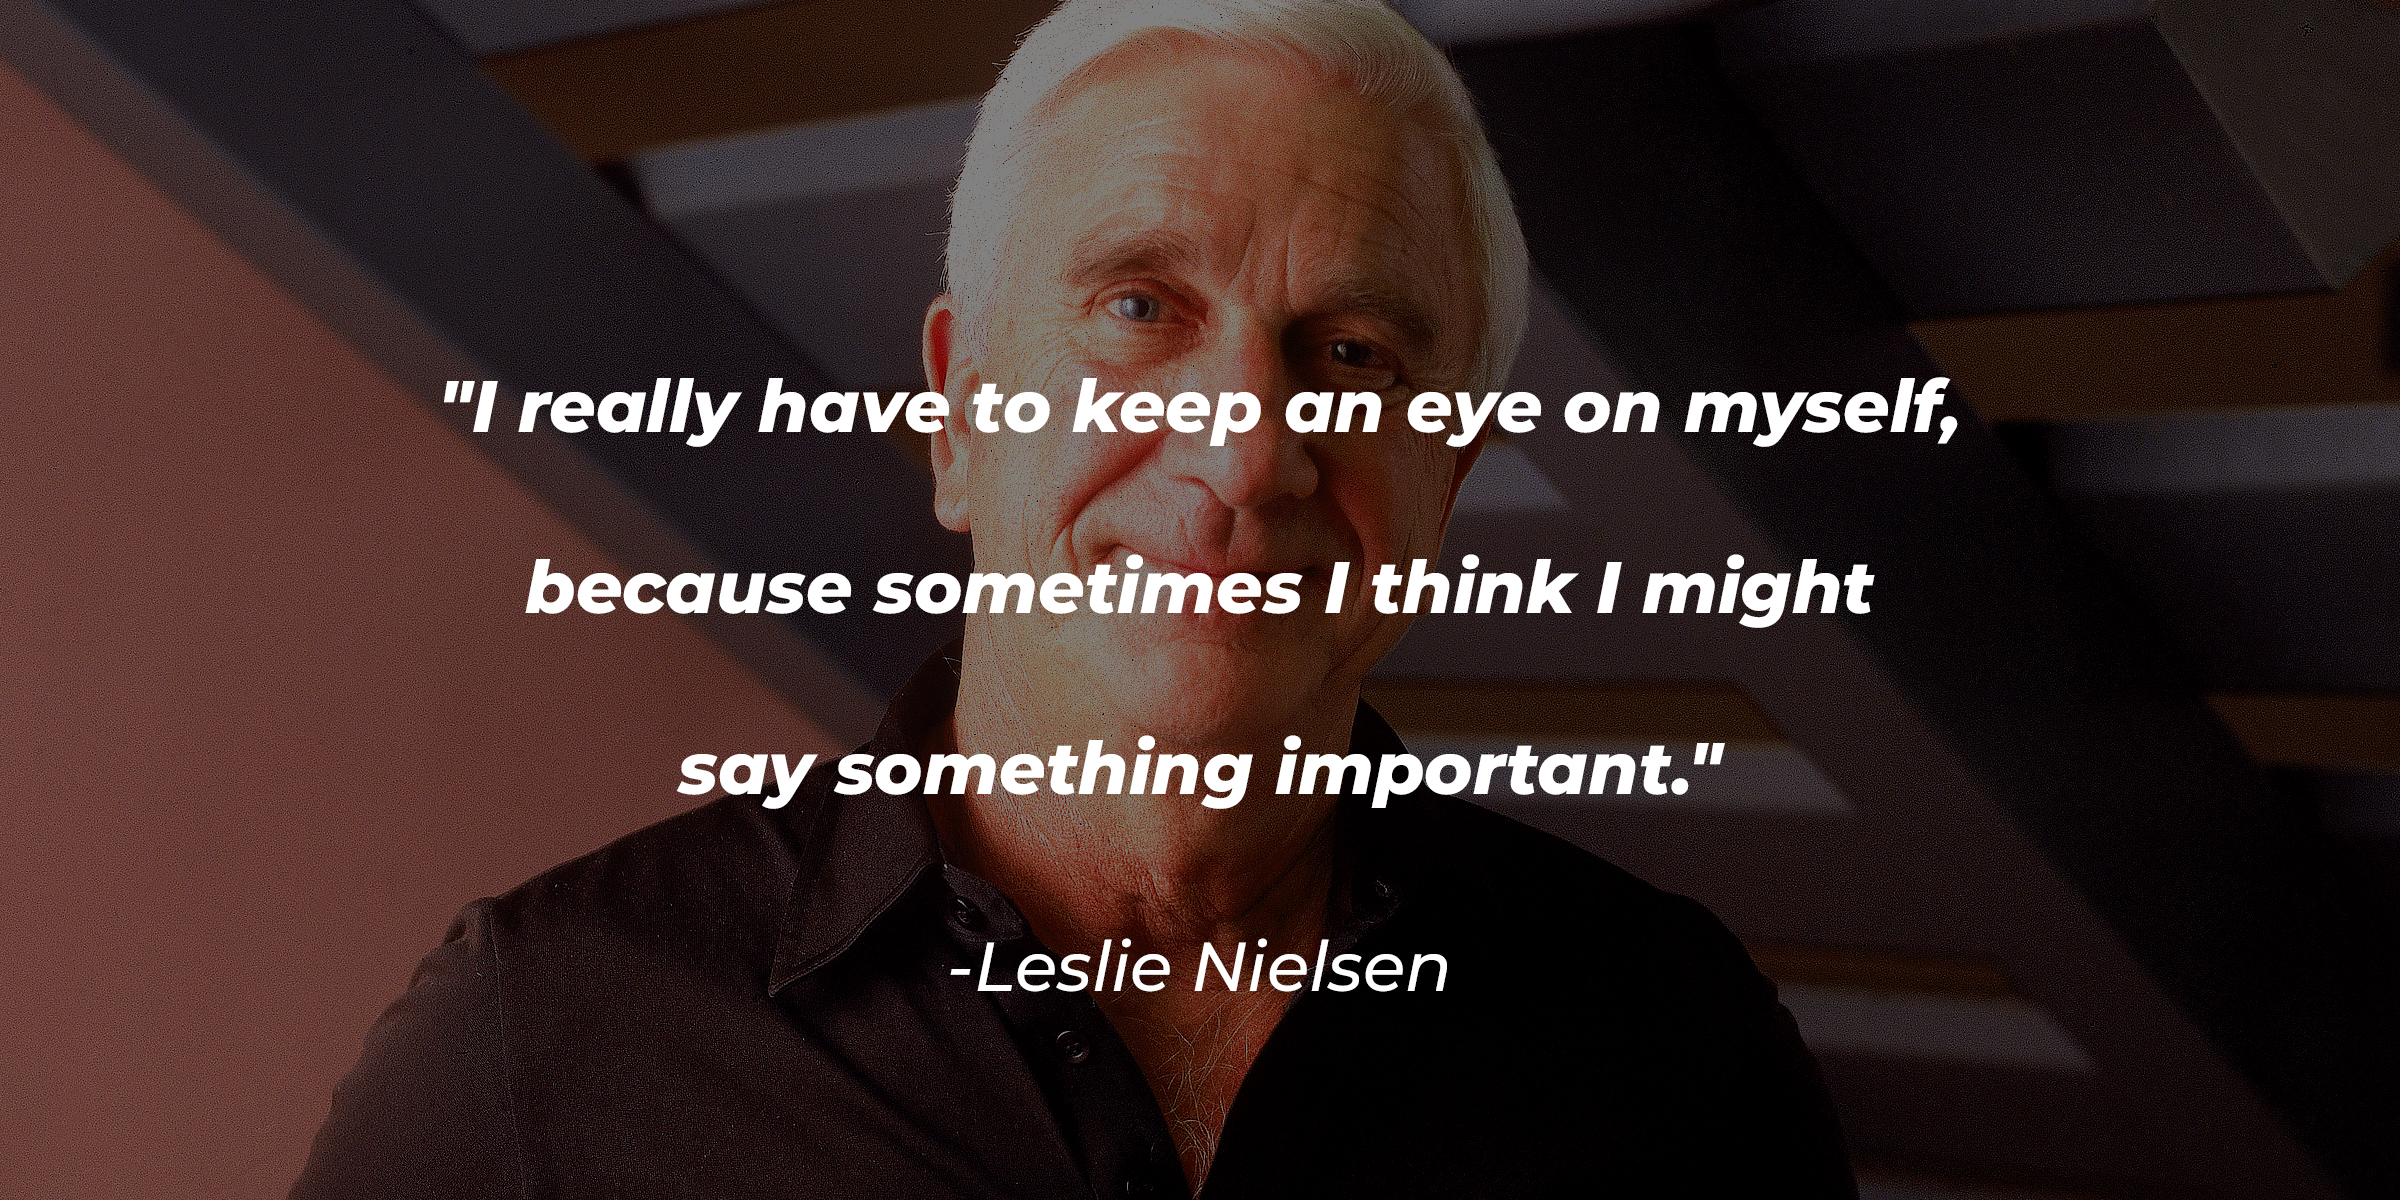 Leslie Nielsen's quote: "I really have to keep an eye on myself, because sometimes I think I might say something important." | Source: Getty Images